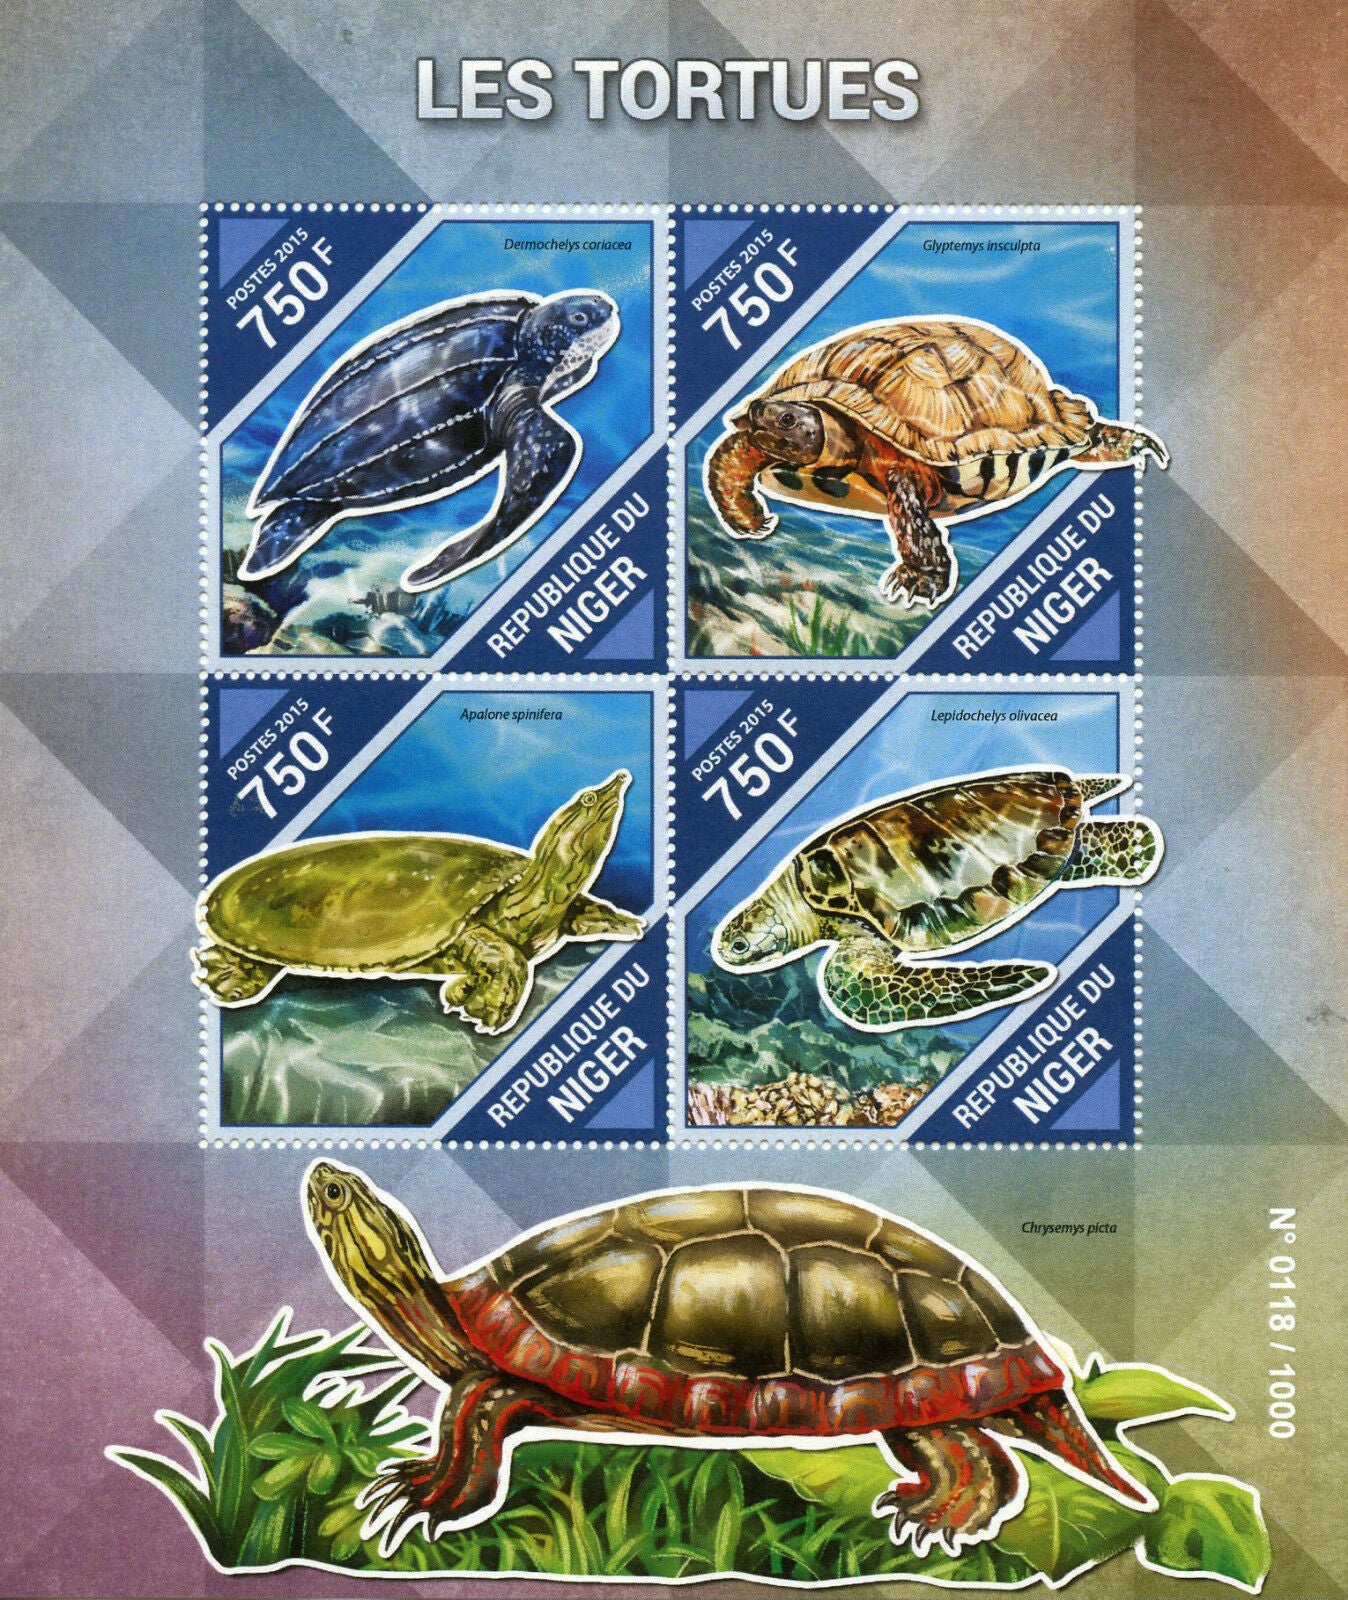 Niger 2015 MNH Turtles 4v M/S Reptiles Tortues Leatherback Sea Turtle